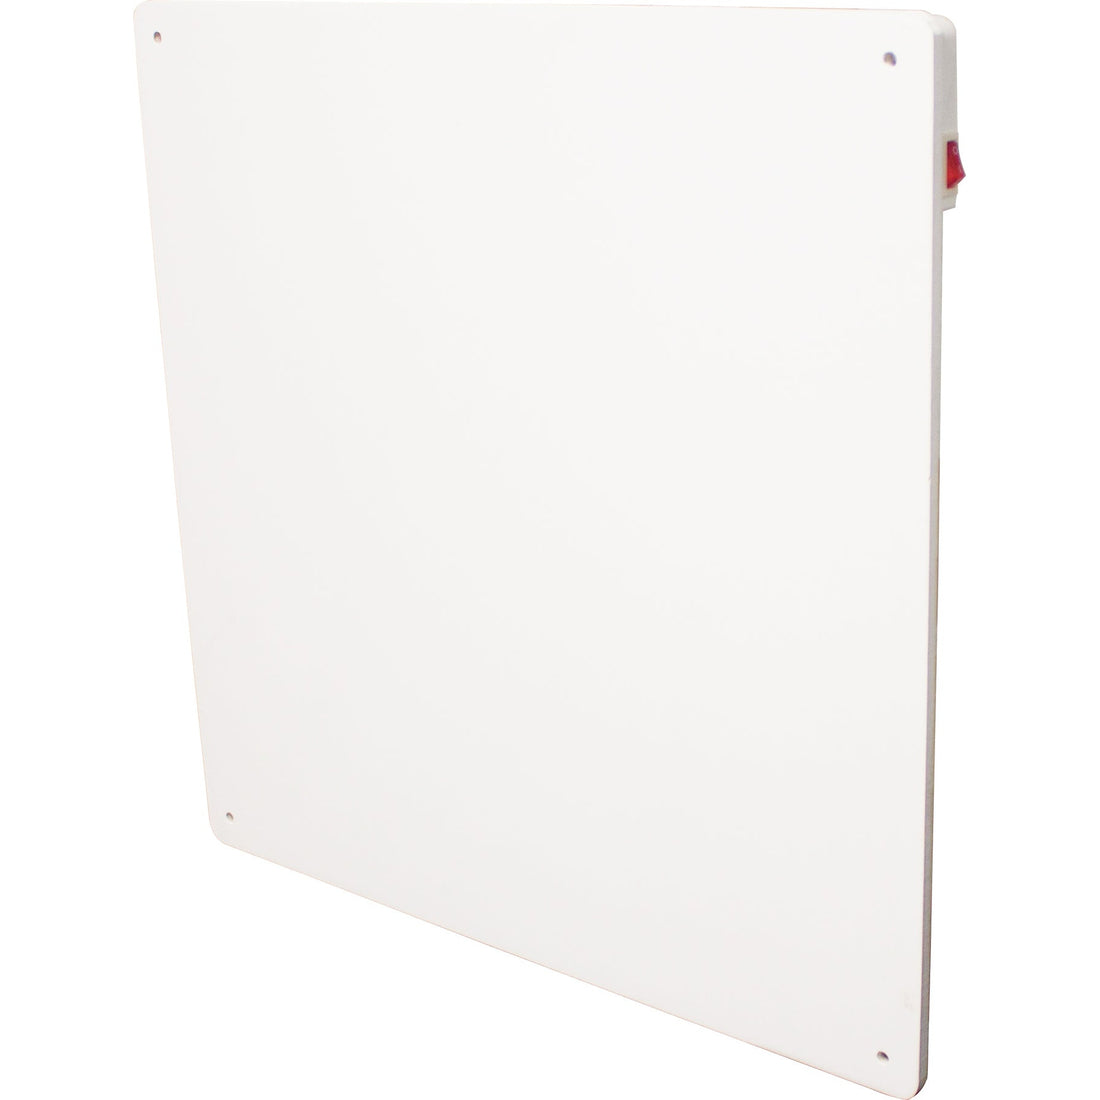 INFRARED WALL-PANEL HEATER - 60x60cm